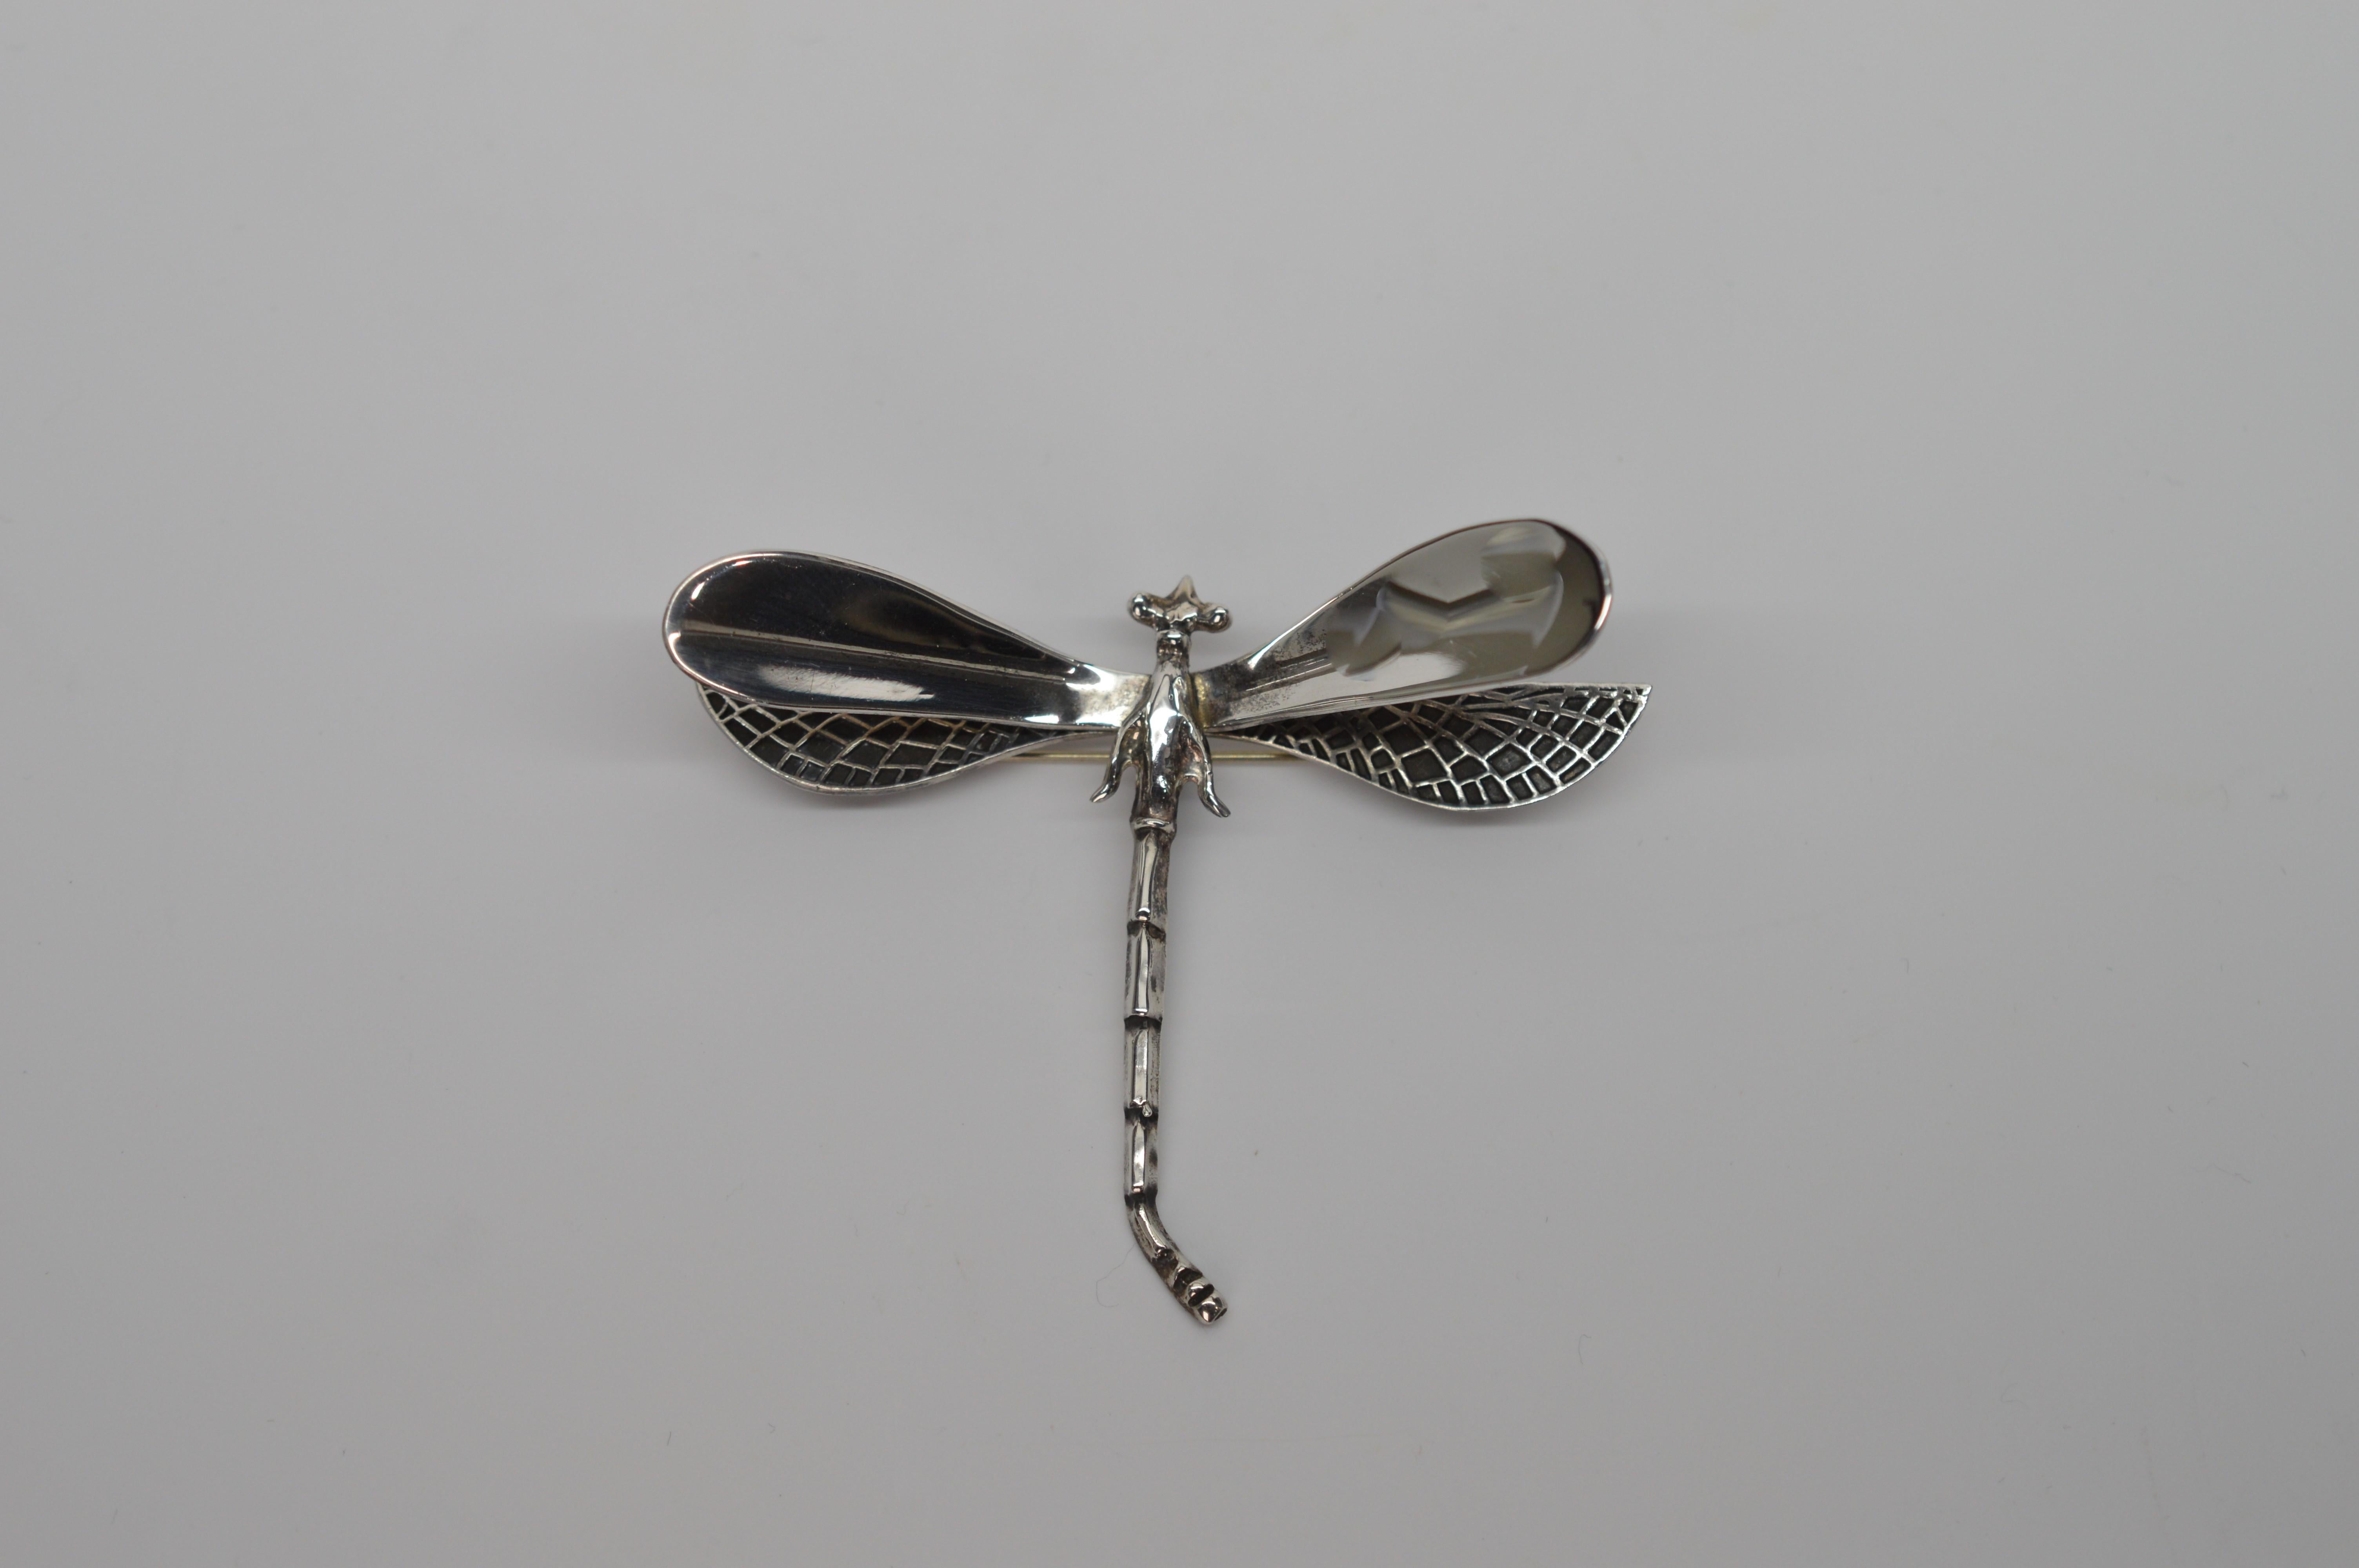 Fun and whimsical, this duo of nature's creatures depicted in Sterling Silver is sure to grab attention.  In an arts and crafts style, the Dragonfly Pin Brooch is multi-dimensional and has a 3 inch wing span and 2-1/4 inch body length. The